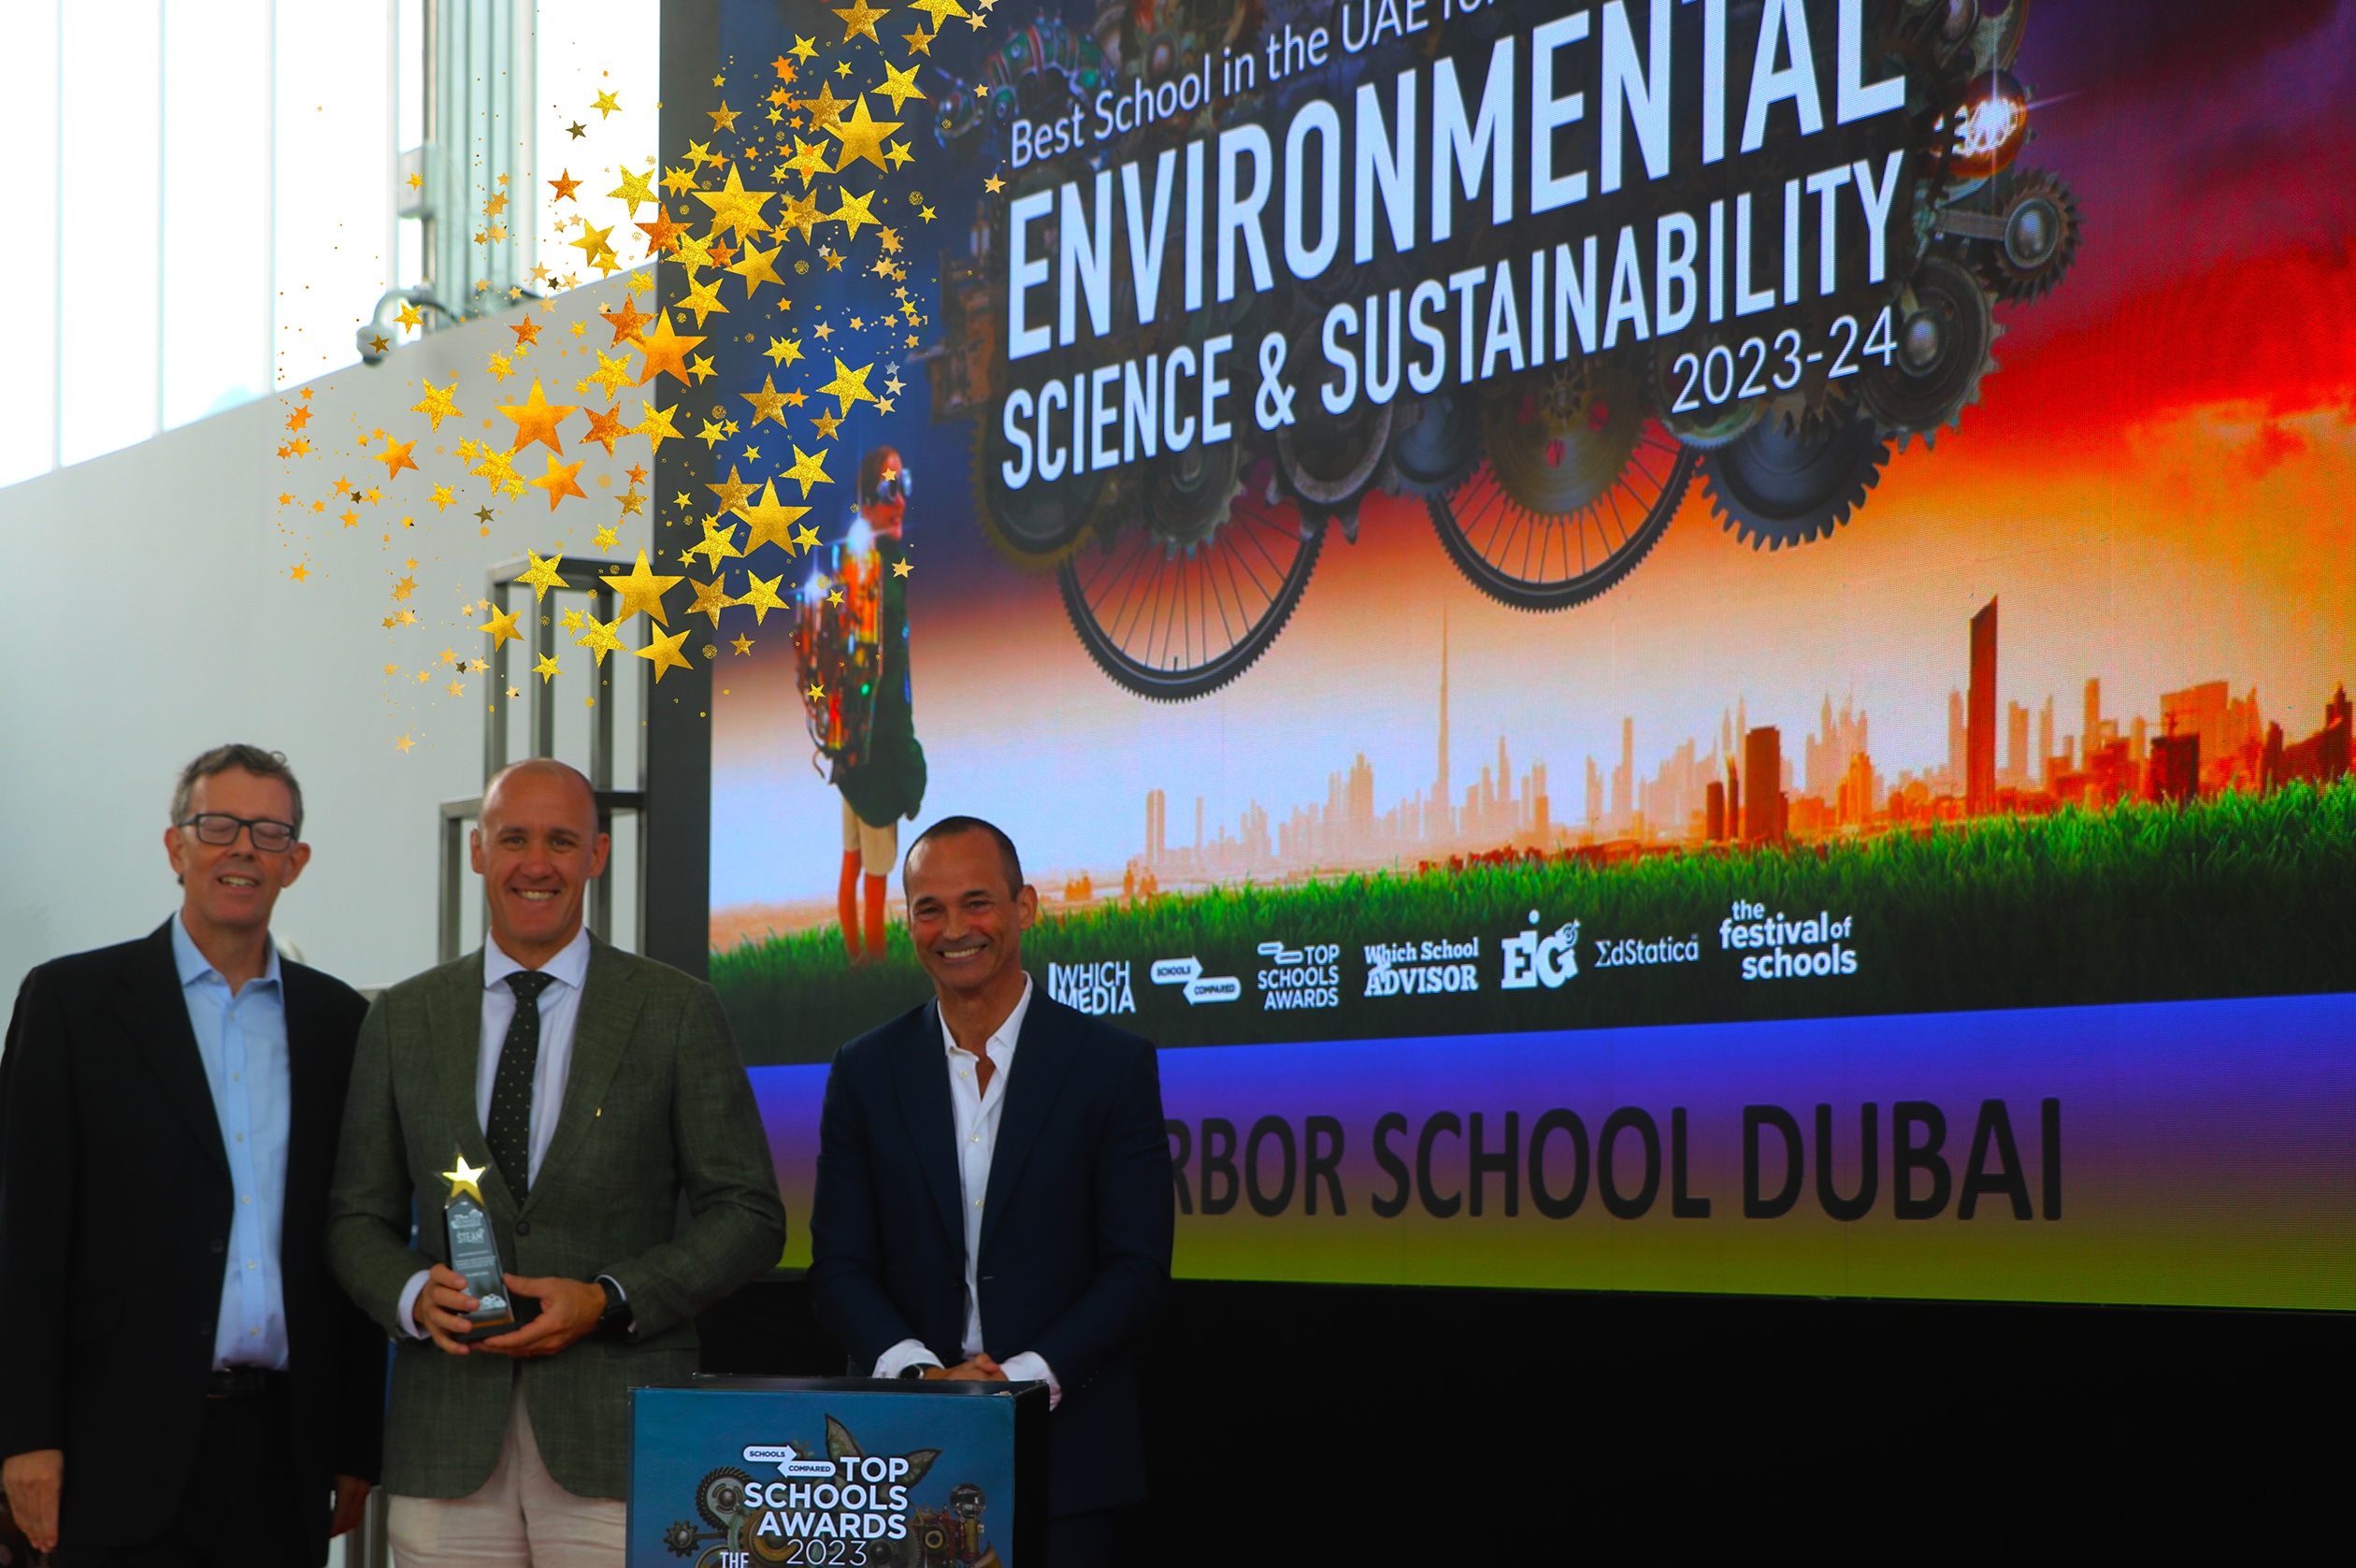 The Arbor School Dubai was recognised with the Award for Best School for Environmental Science, Sustainability and Eco Literacy at The Top Schools Awards 2024